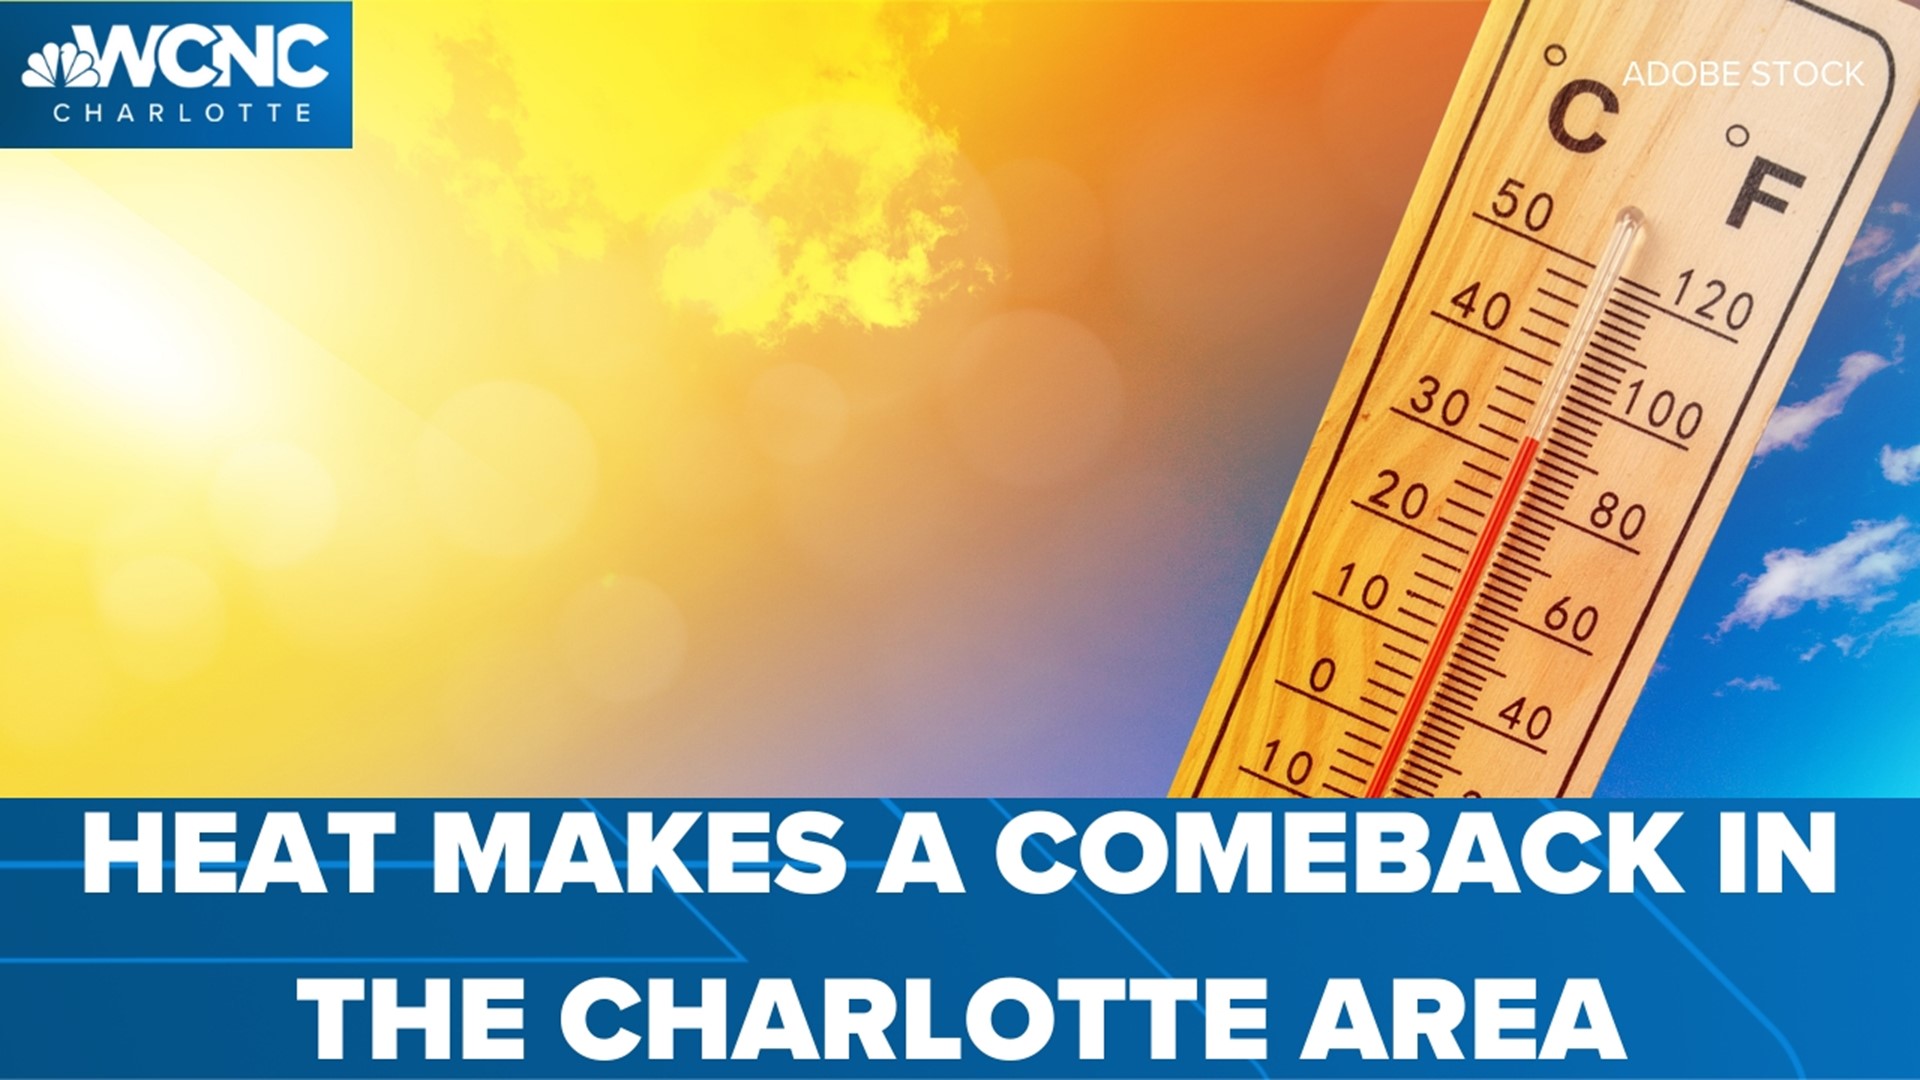 Thursday and Friday are two days the WCNC Charlotte Weather Team wants you and your family to be Weather Aware.